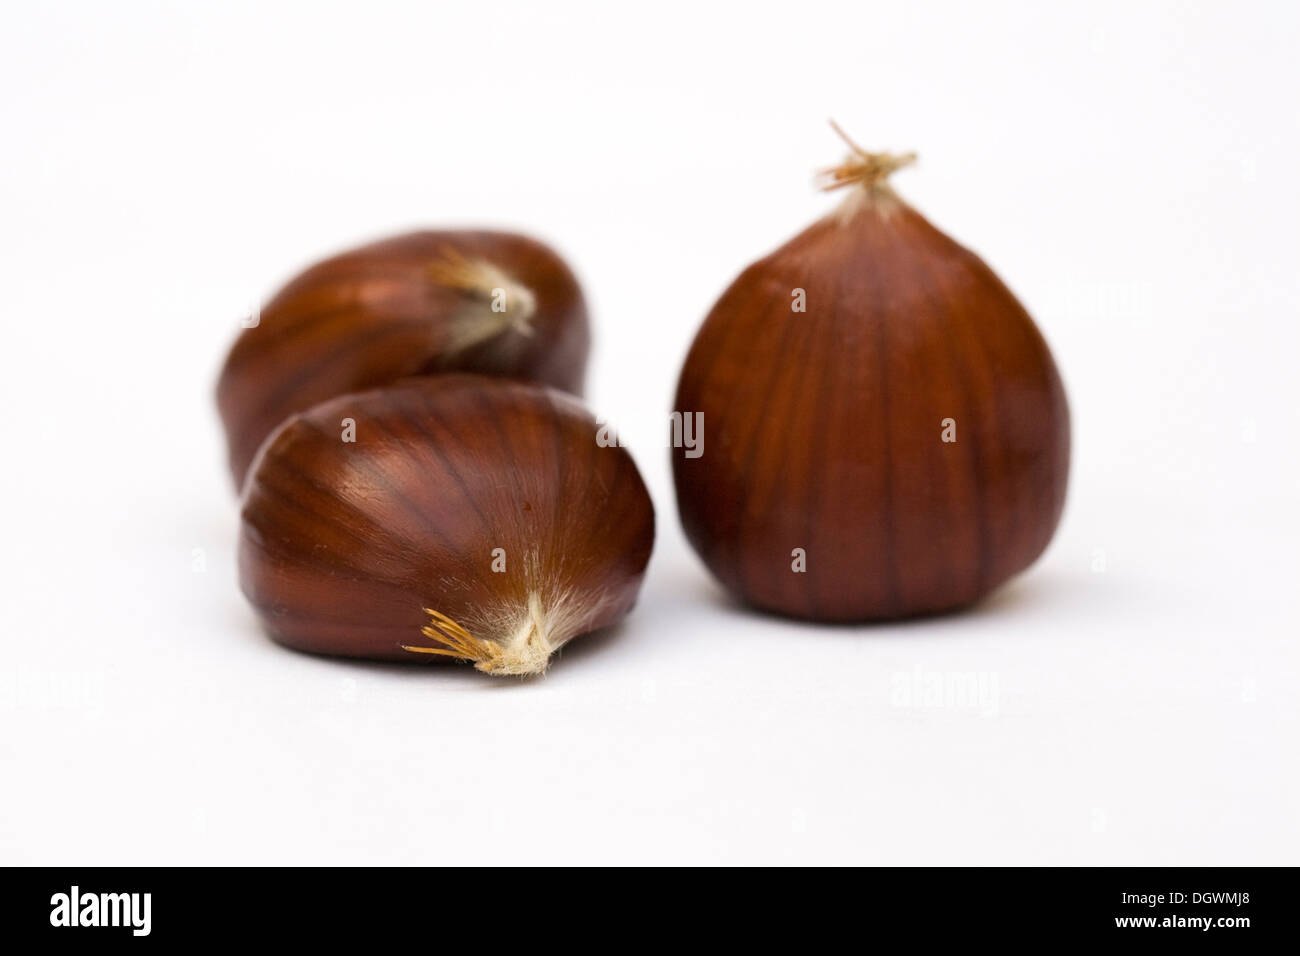 Castanea sativa. Sweet Chestnuts isolated on a white background. Stock Photo